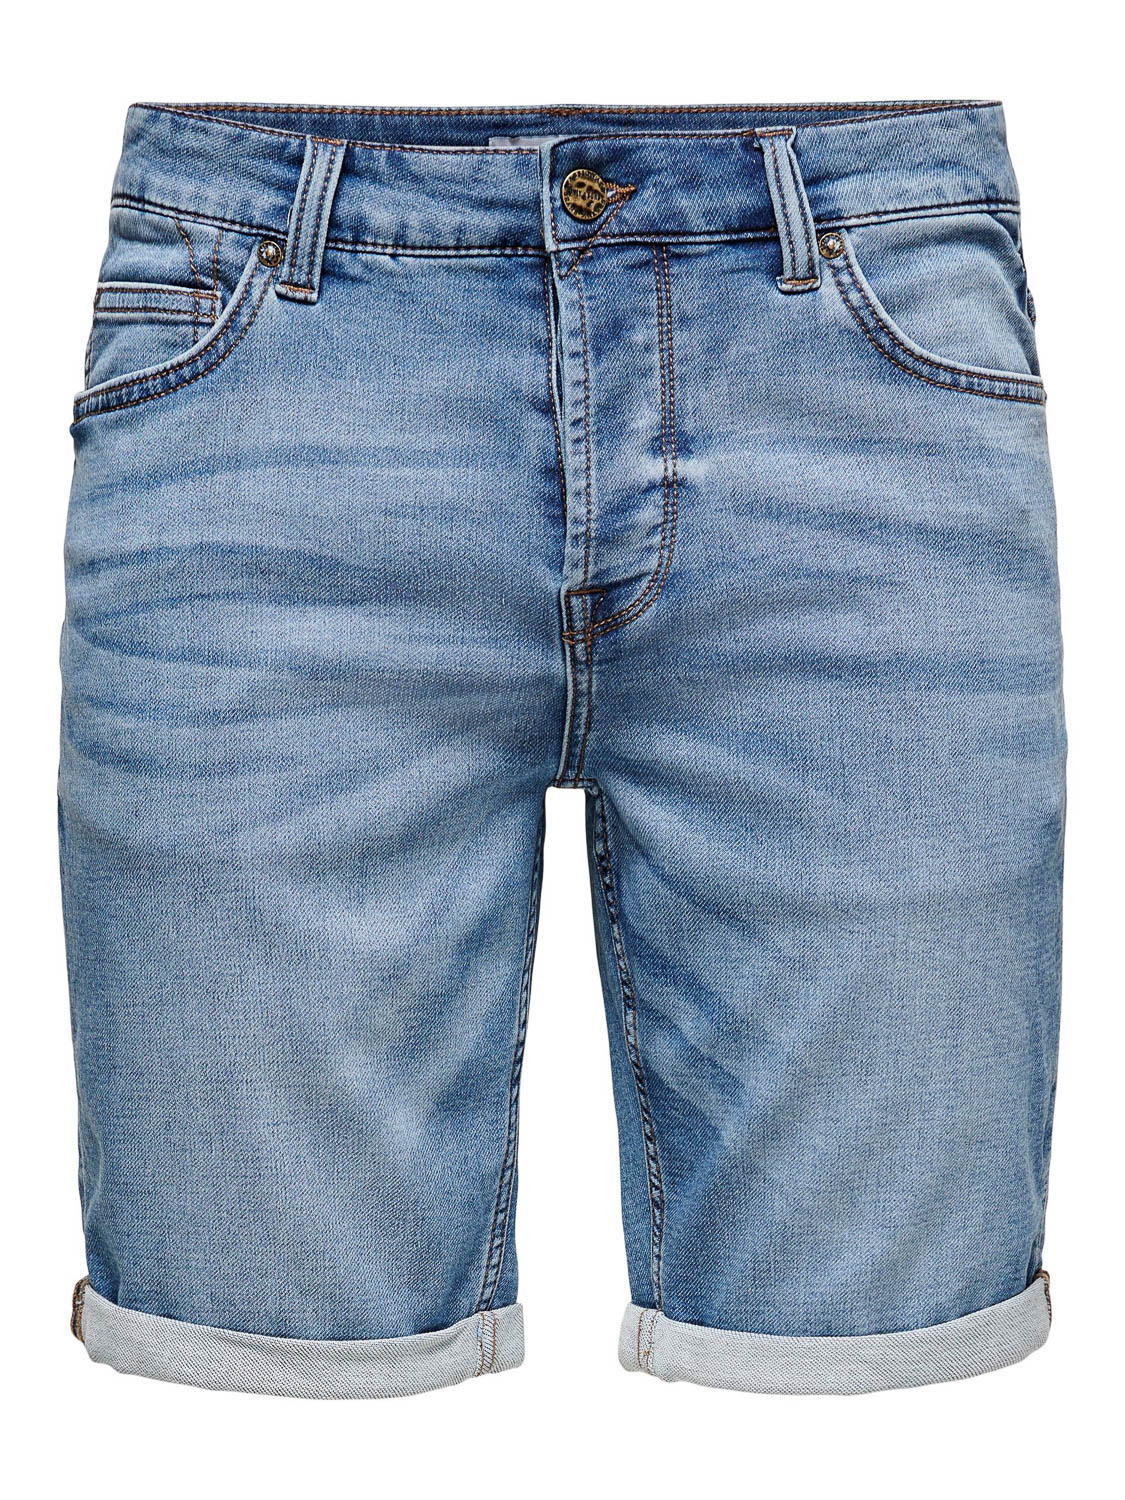 Only and Sons Onsply Life Jog Blue Shorts Pk 8584: